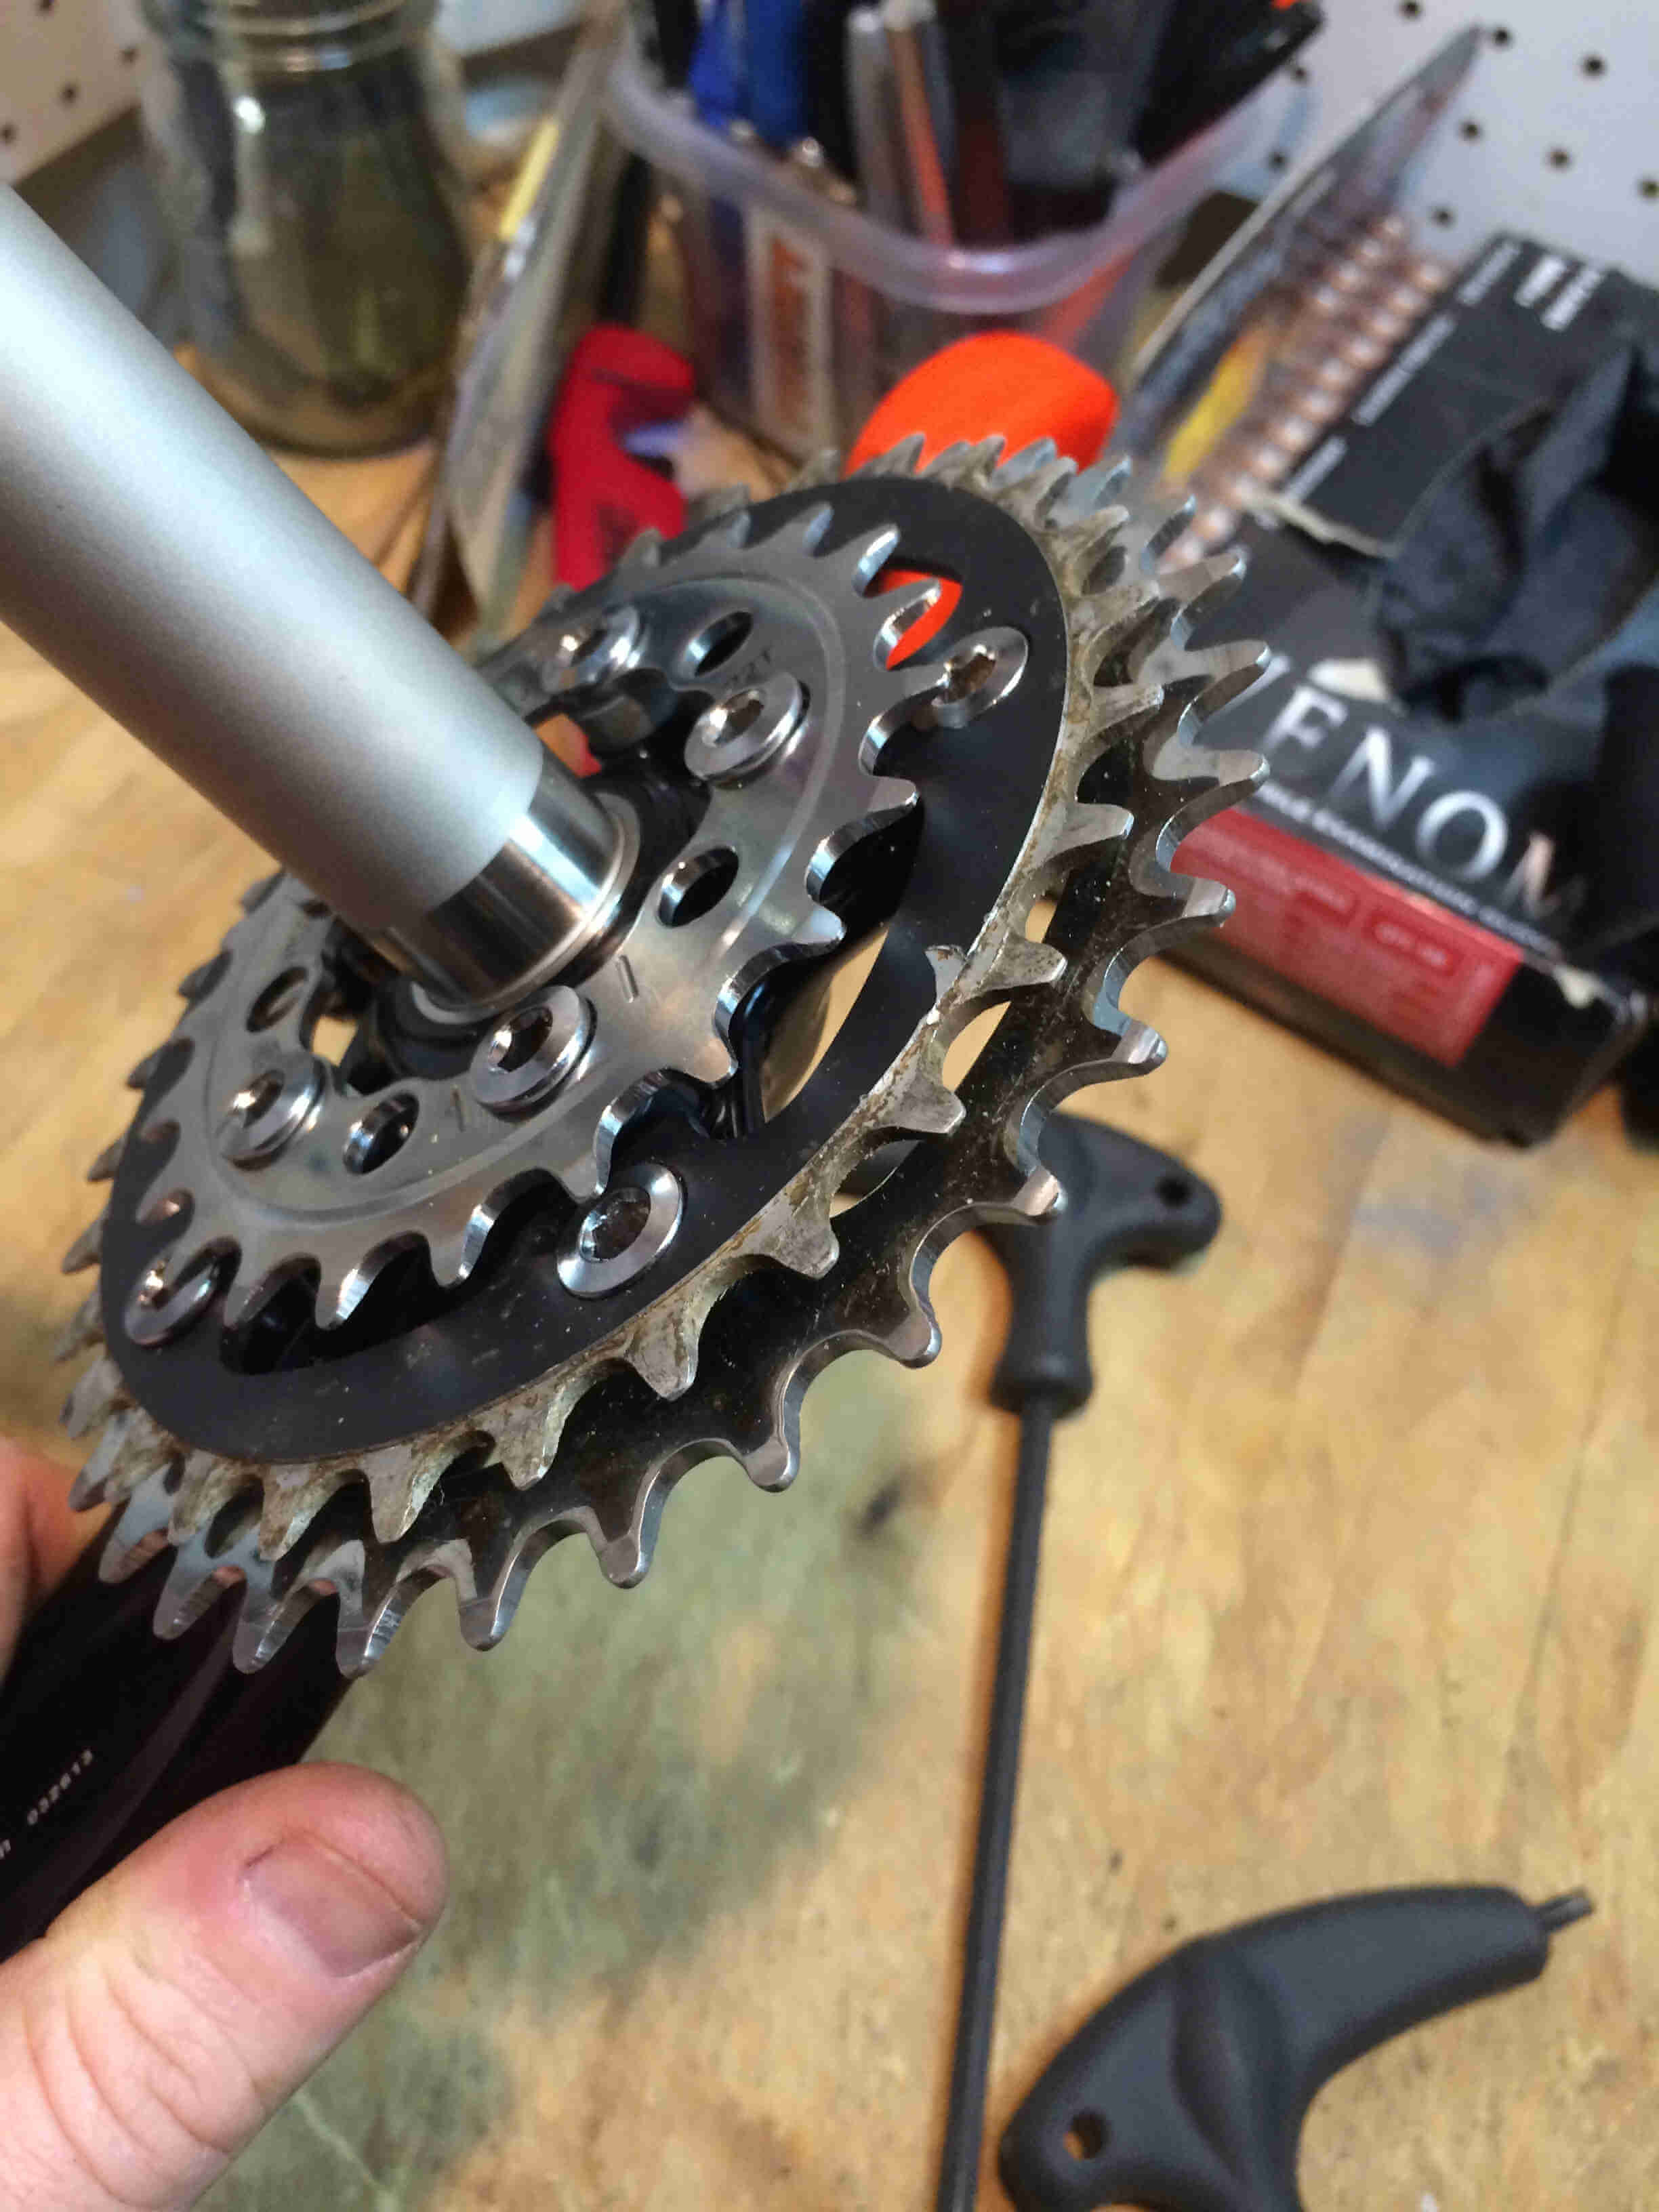 Downward, side view of a Surly Bikes O.D Crankset, showing chainring detail